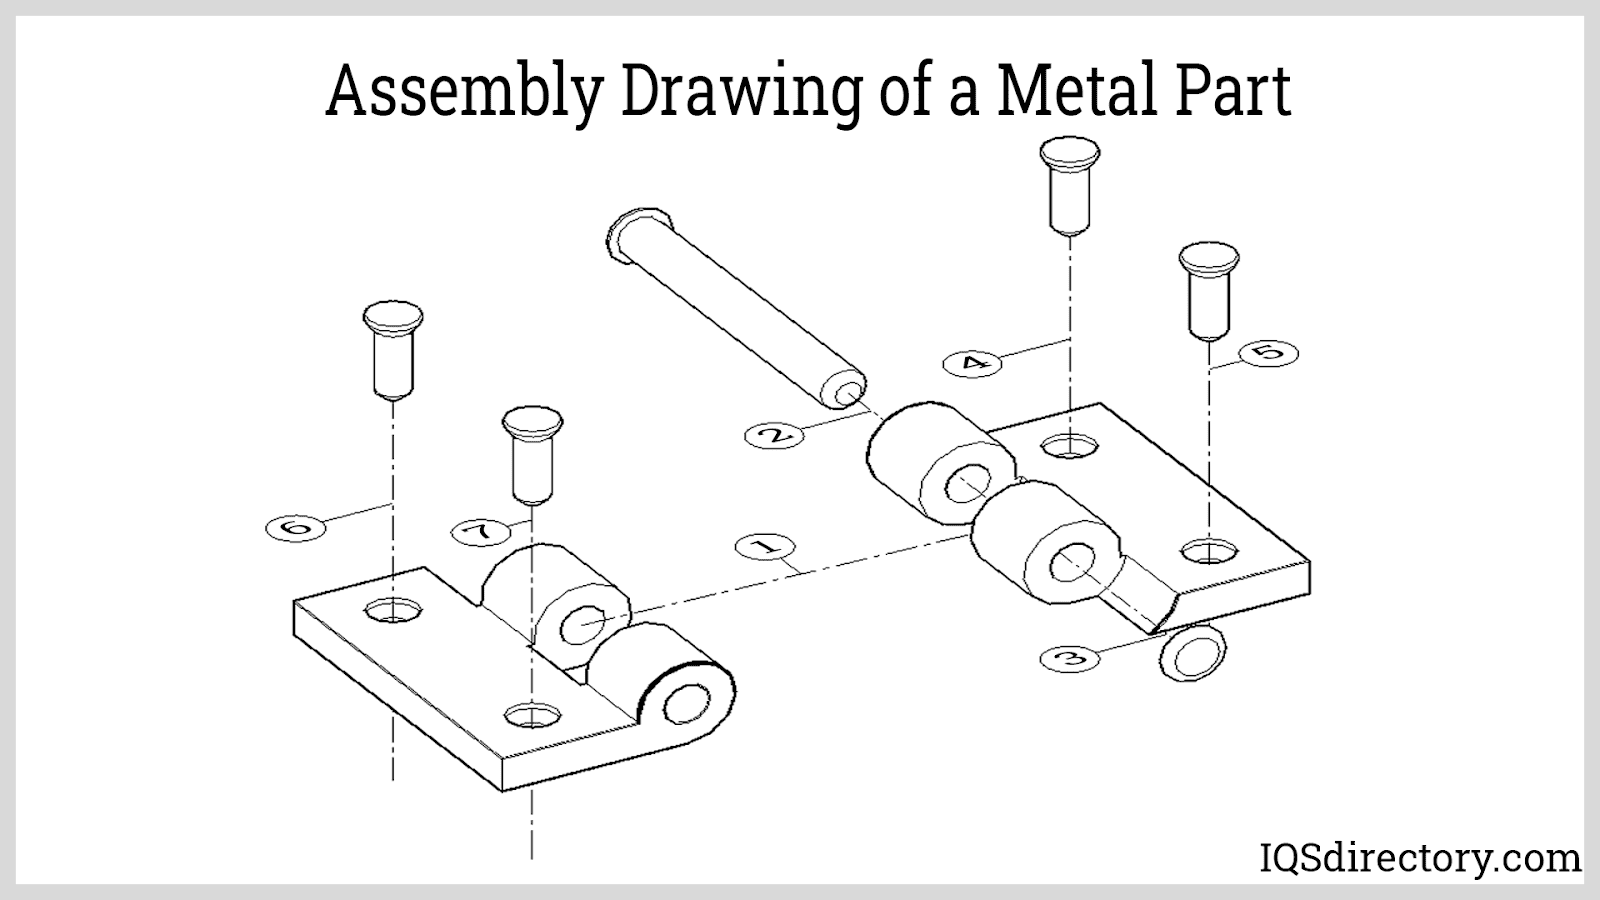 Assembly Drawing of a Metal Part